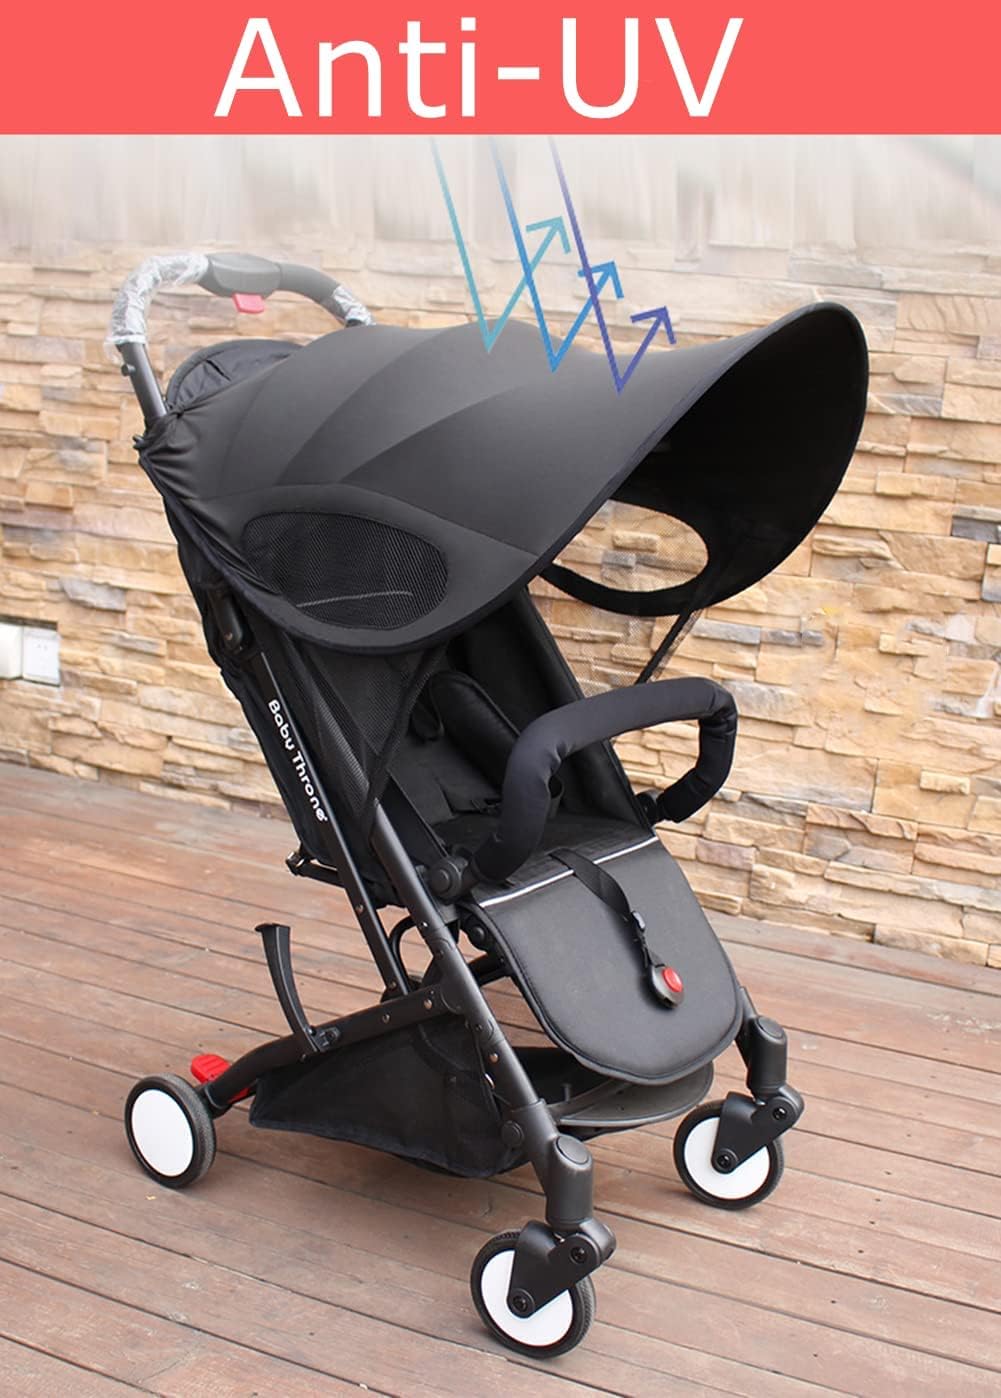 Baby Pram Sun Shade Cover, Universal Stroller Sunshade Cover Anti-UV, Portable Baby Stroller Awning Pushchair Sun Canopy Windproof Waterproof with Arched Hard Support (Black)